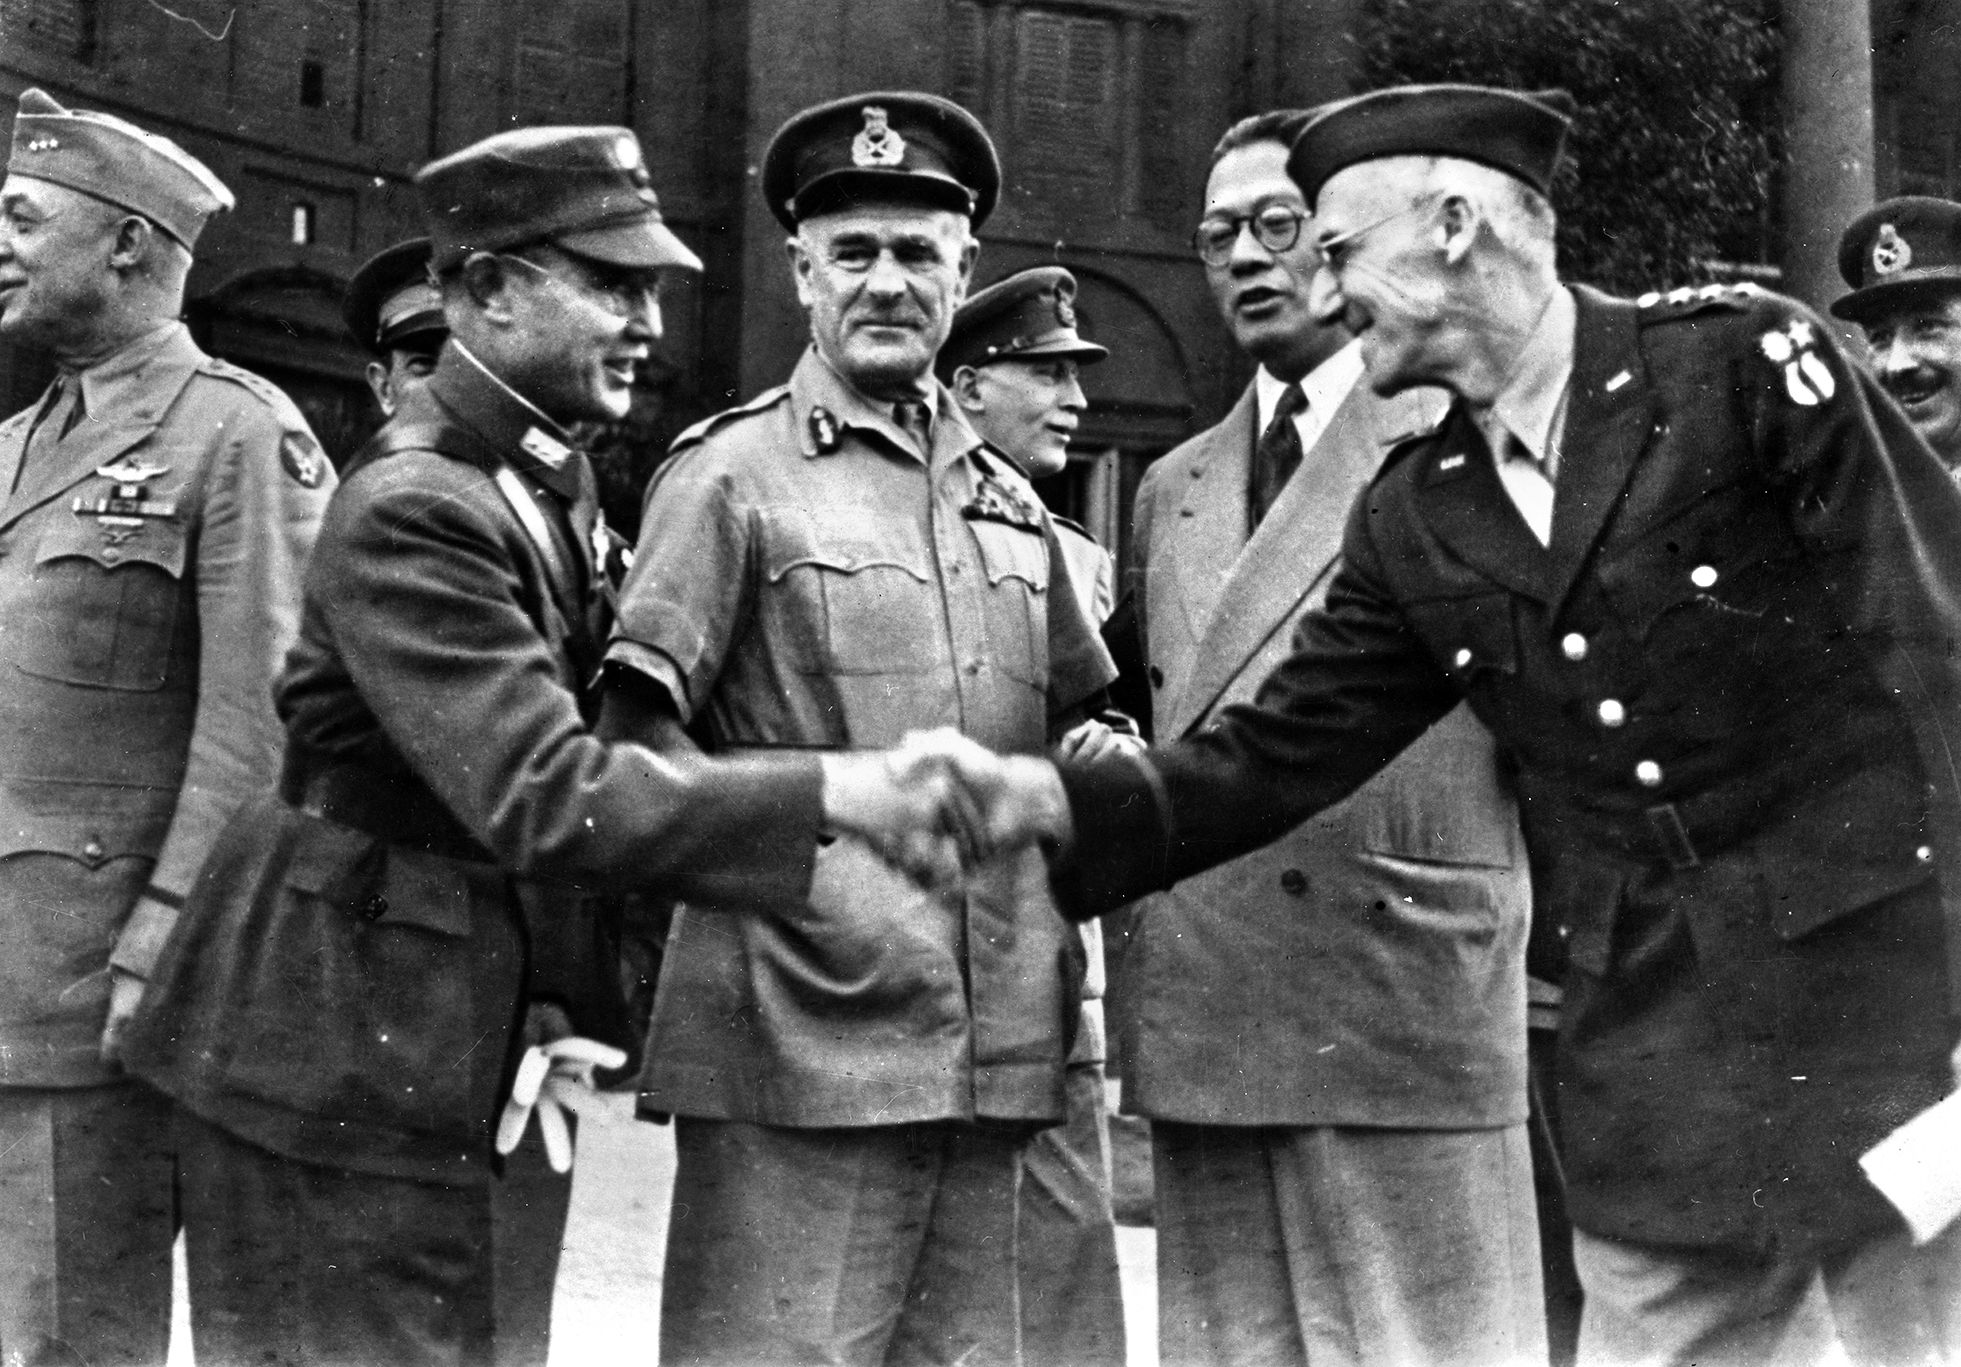 Field Marshal Archibald Wavell stands at center as Chinese General Chen Cheng and U.S. General Joseph Stilwell shake hands prior to the beginning of an Allied conference in Delhi, India.